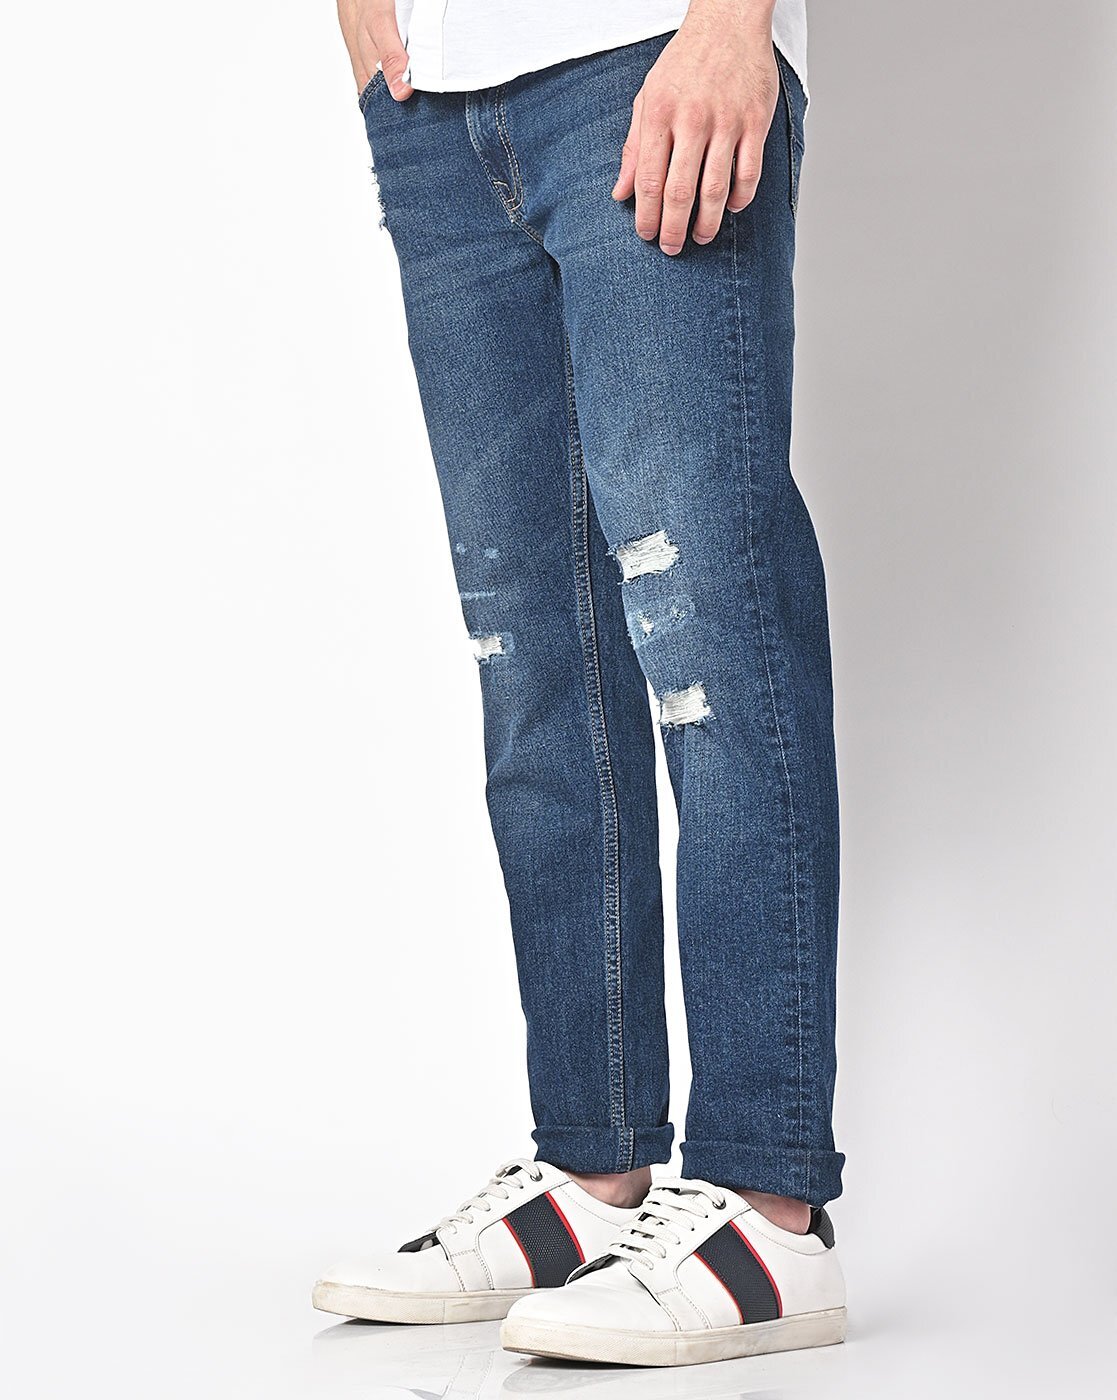 Men Slim Fit Simply Ripped Jeans - Blue | Ripped jeans men, White jeans men,  Slim fit ripped jeans